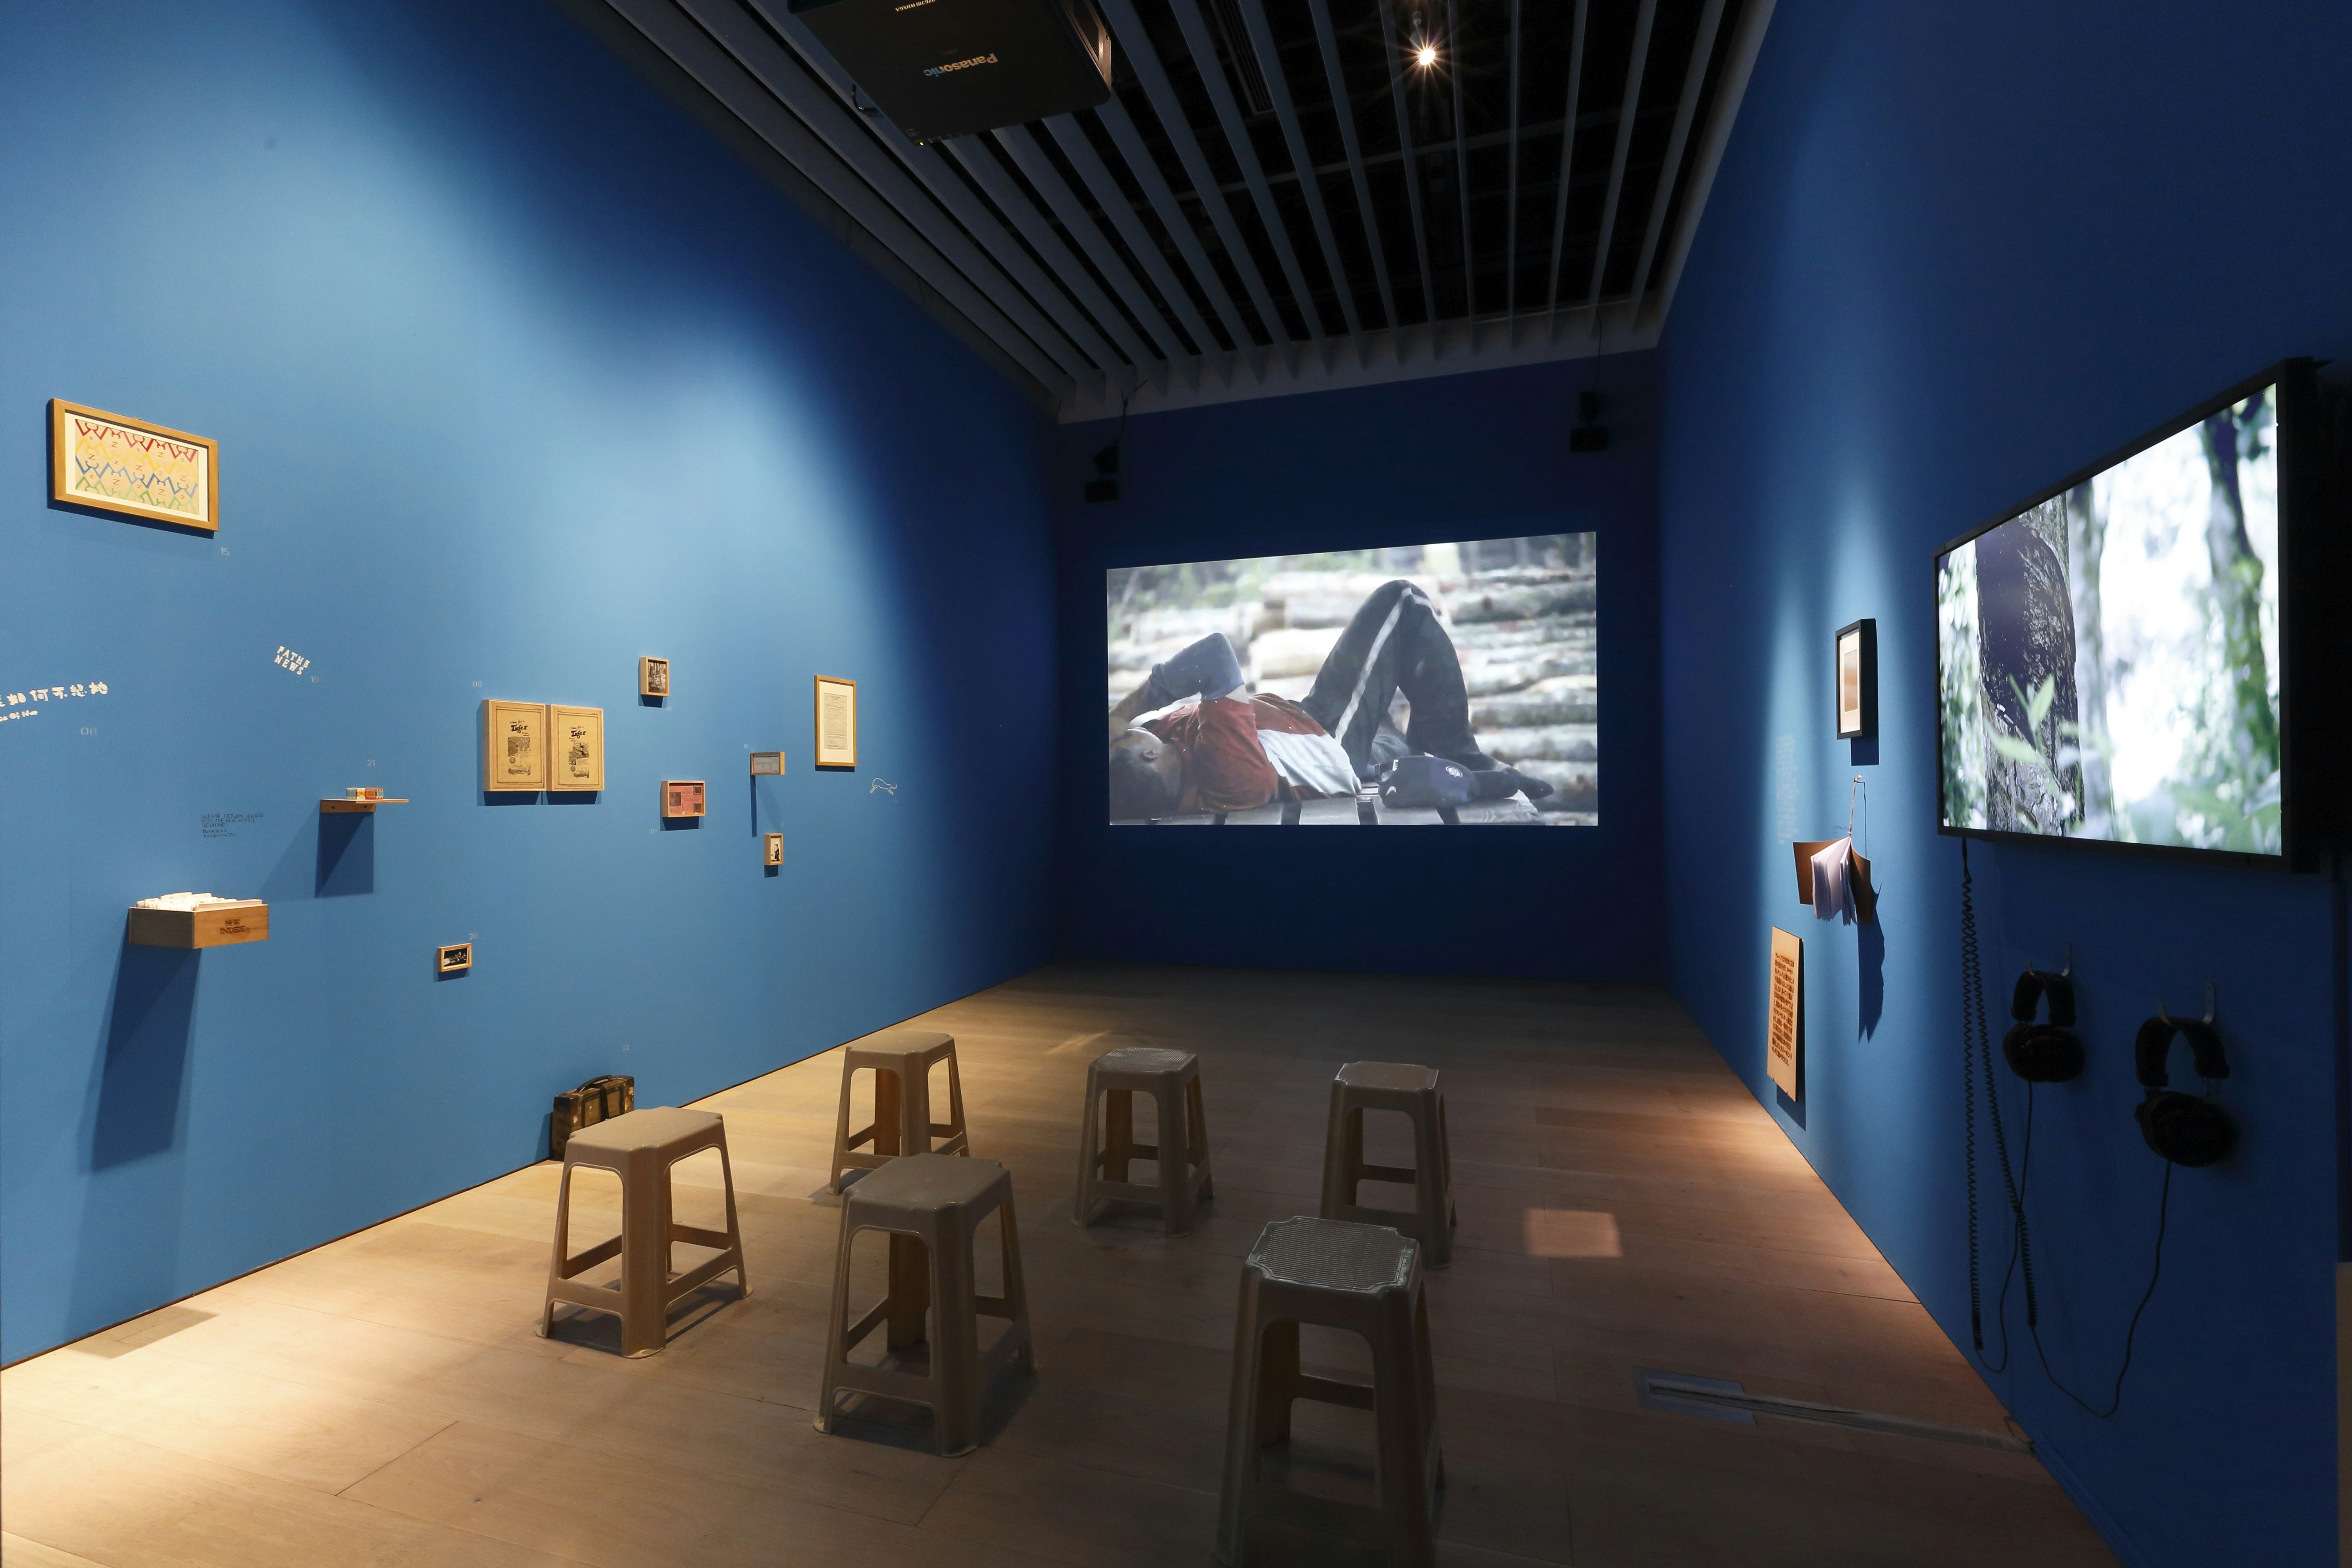 A blue, dimly lit room with wooden pieces installed on the left wall, a projection screening at the back wall, and a TV monitor with attached headphones installed on the right wall. There are six wooden stalls arranged in the middle of the room, facing the projection. 